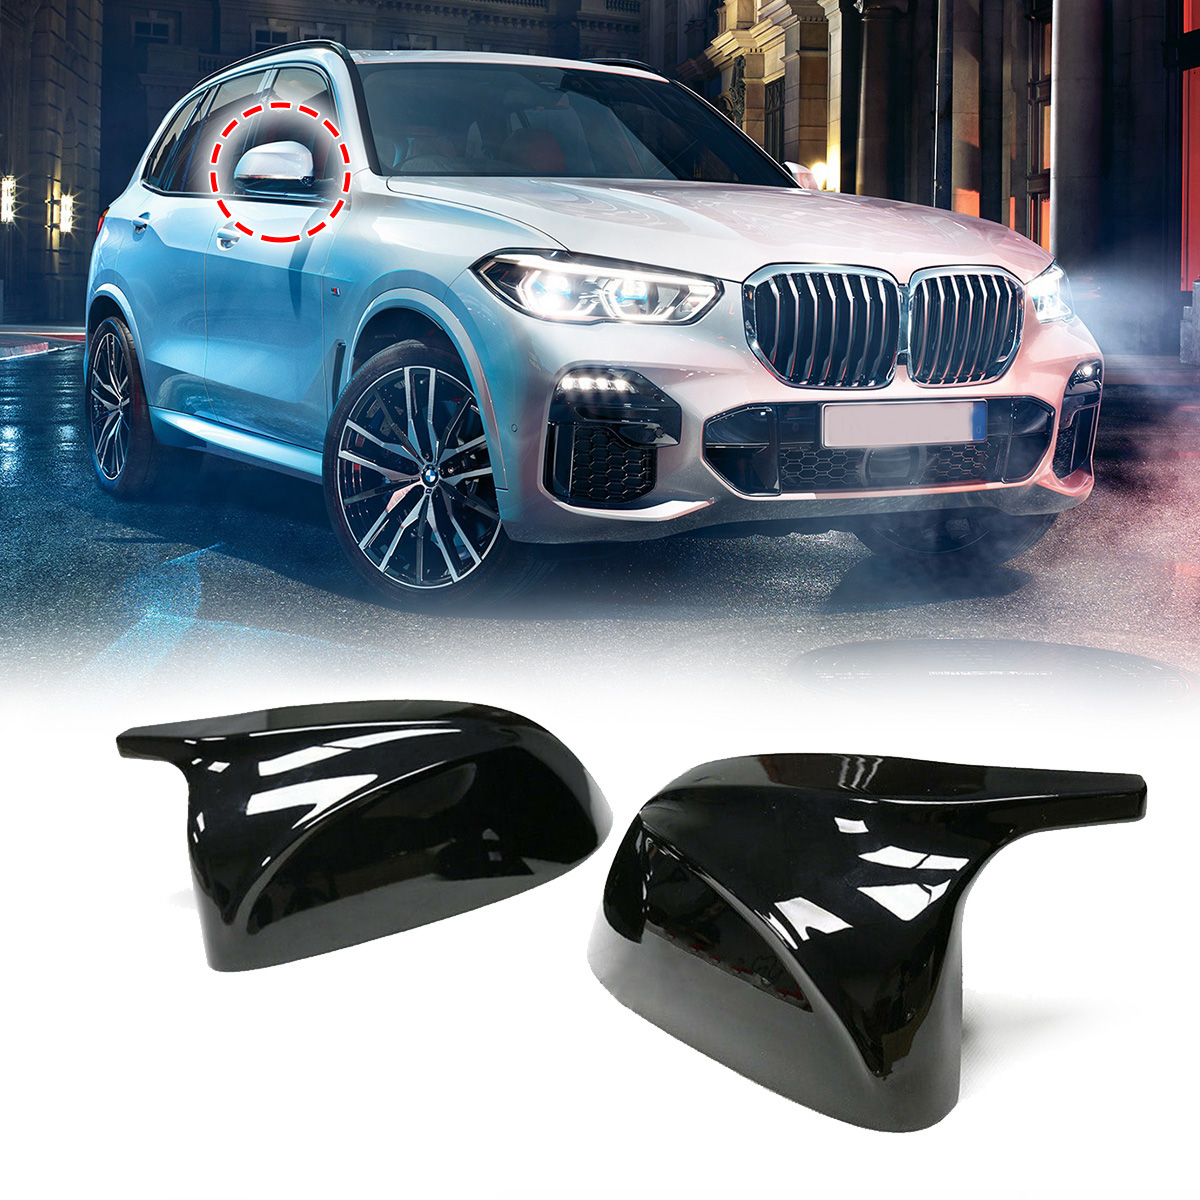 

Glossy Black Side Car Mirror Cover For BMW X3 G01 2018 +For BMW X4 G02 2018 +For BMW X5 G05 2018 +For BMW X7 G07 2018 +